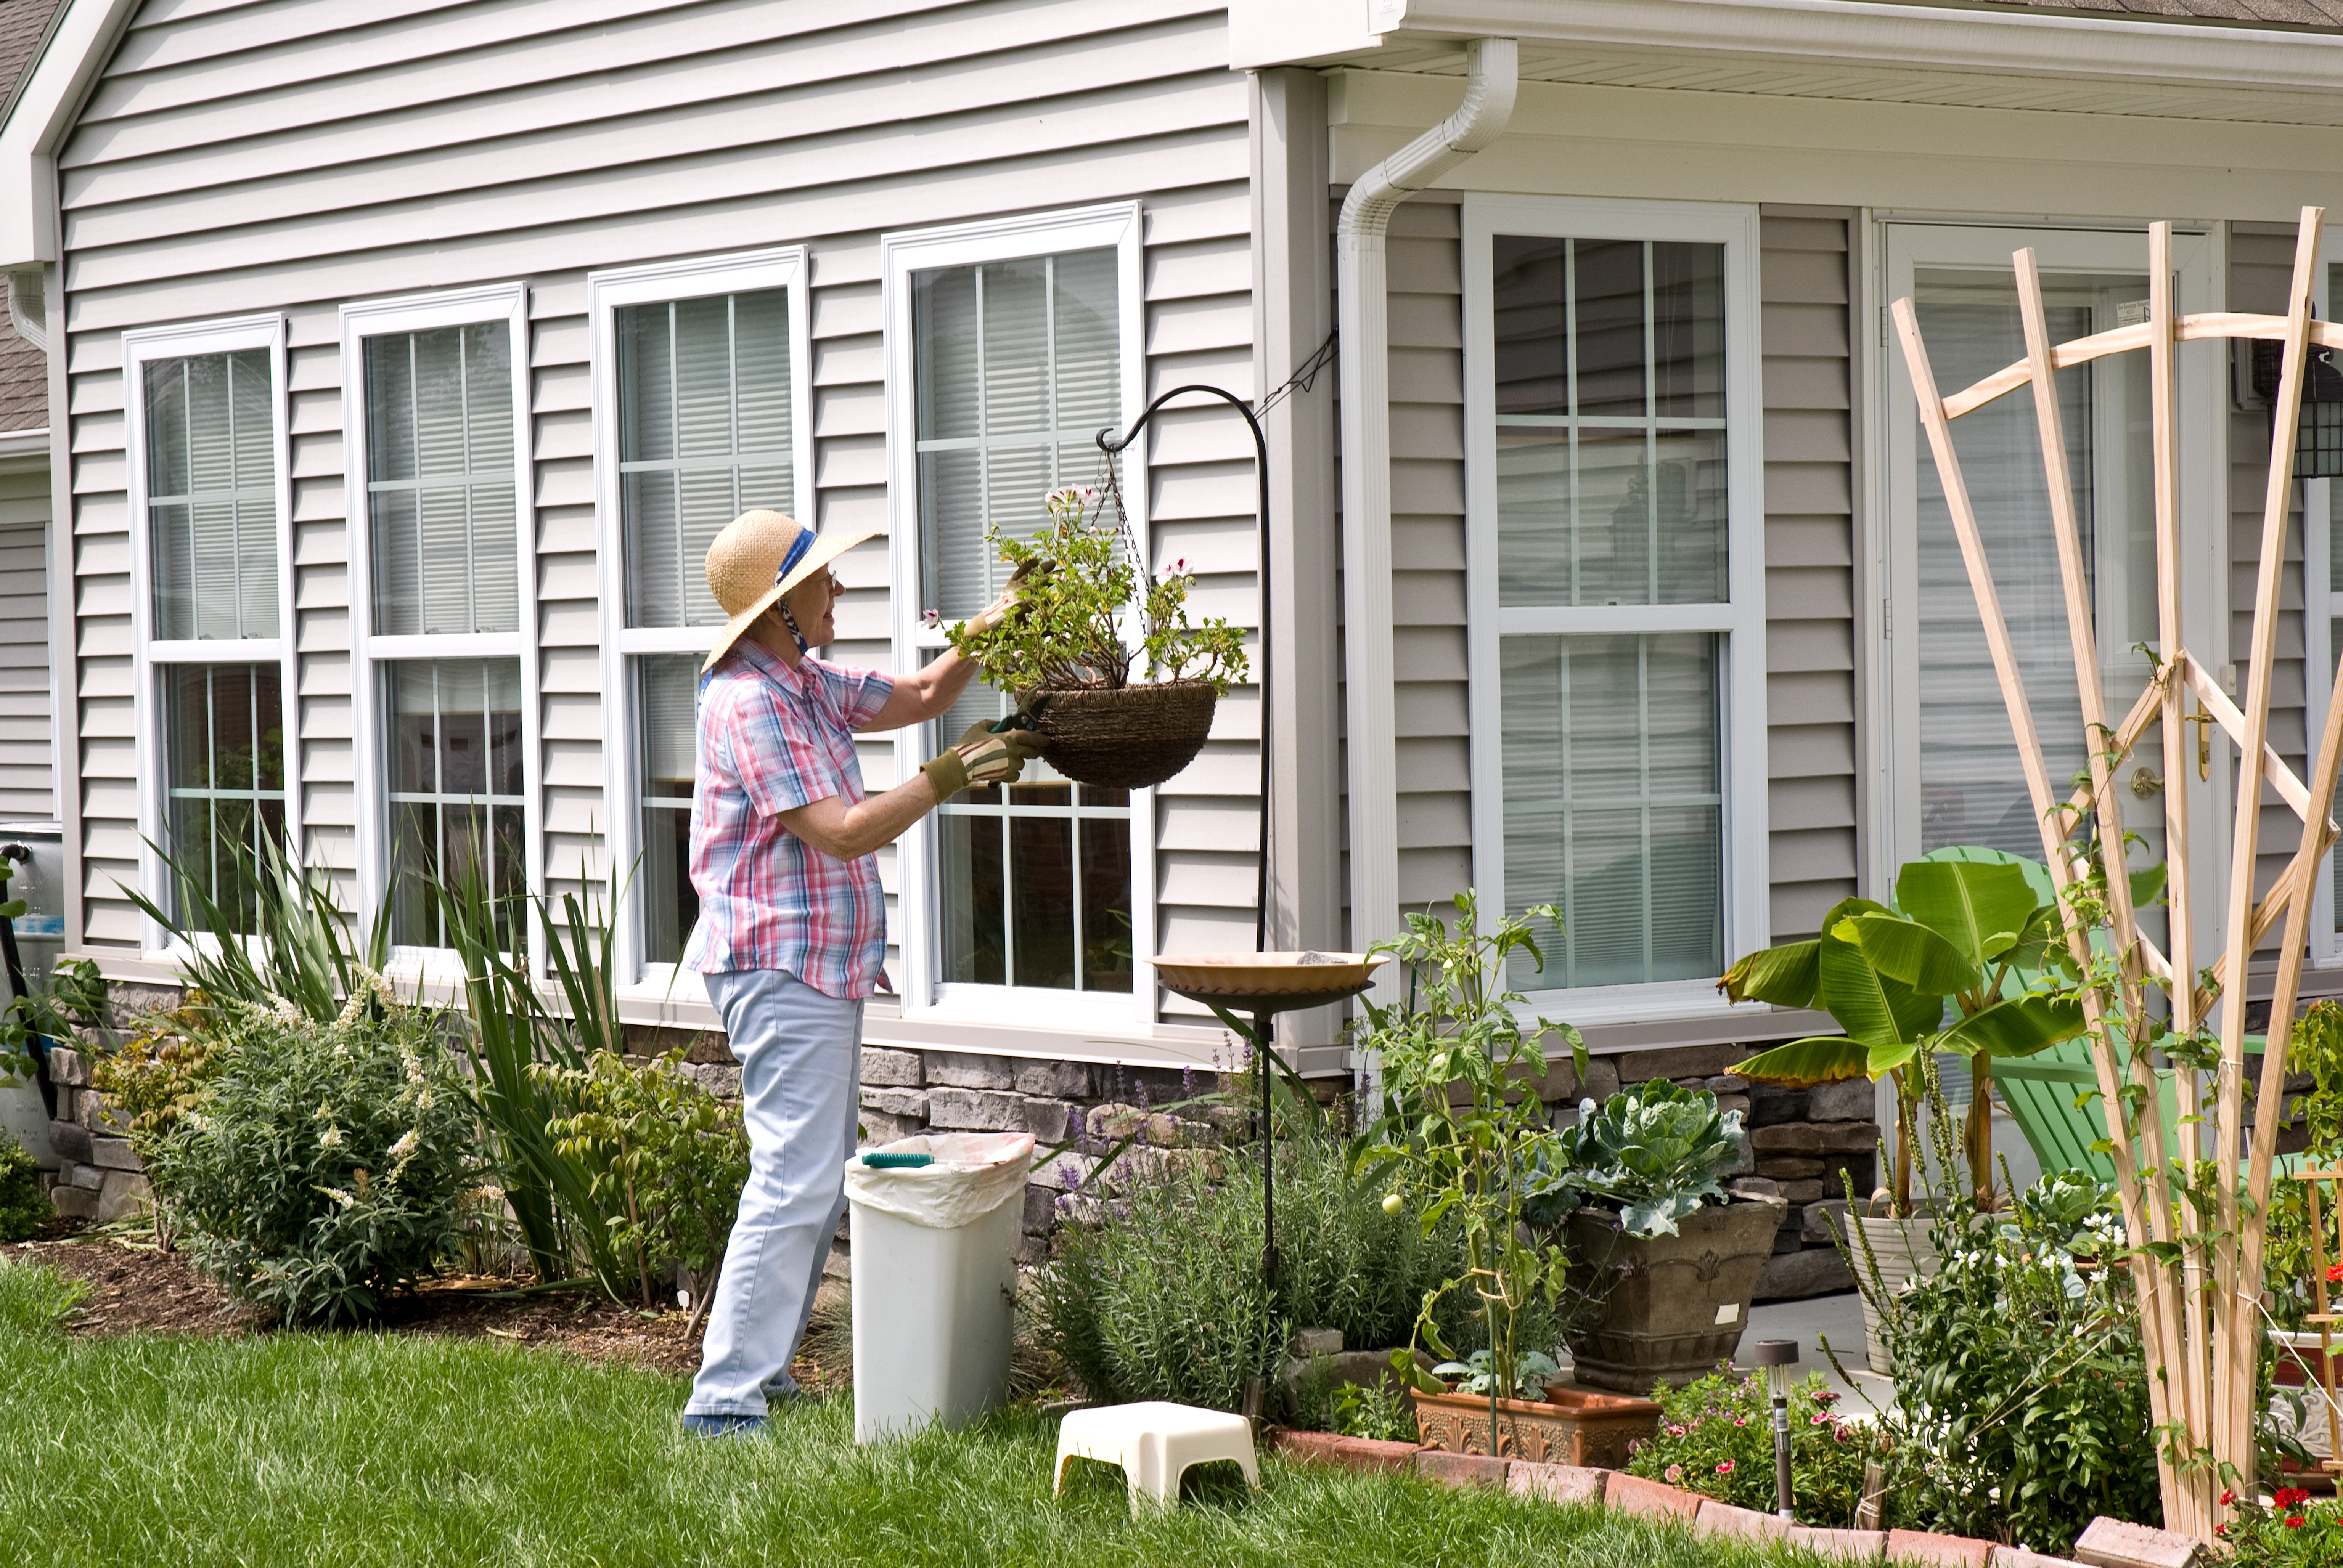 Woman tending to plants outdoors